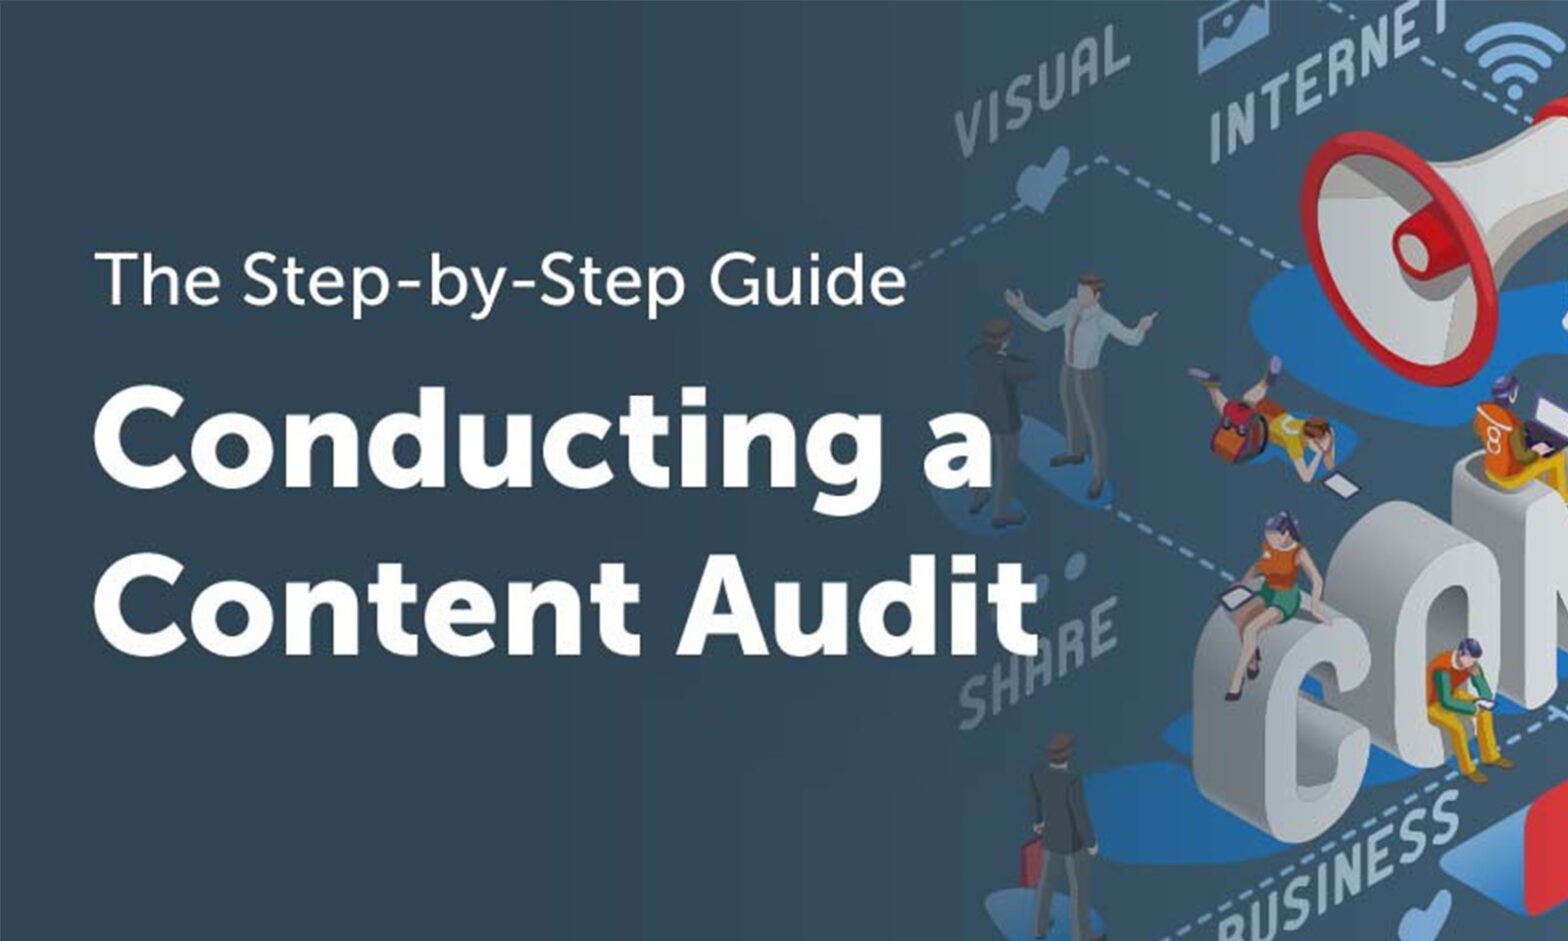 Step-by-Step Guide to Conducting a Content Audit